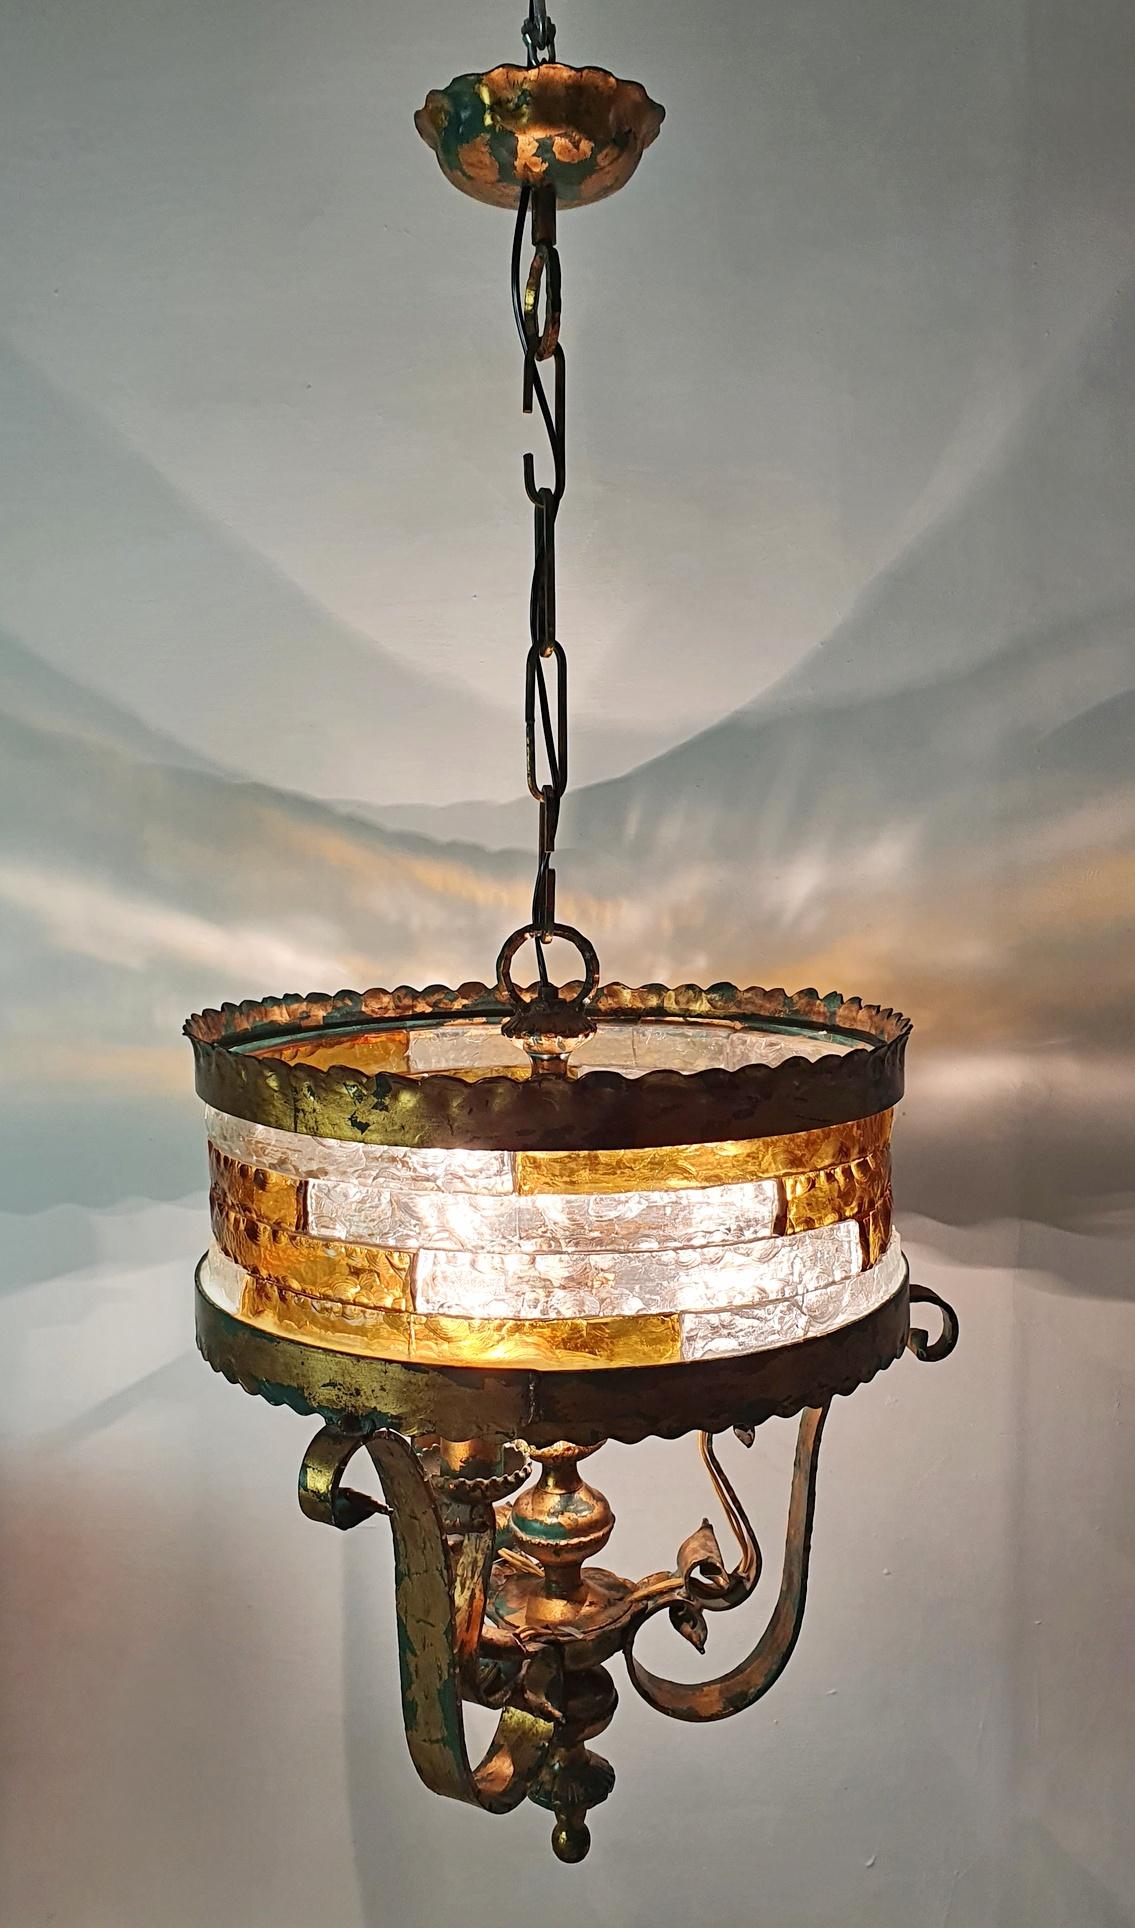 Rare Brutalist style ceiling lamp attributed to Italian manufacturer Longobard in iron and colored glass. In good working condition. There are some small older cracks on a few pieces of glass but nothing that minimizes the overall impressions of the